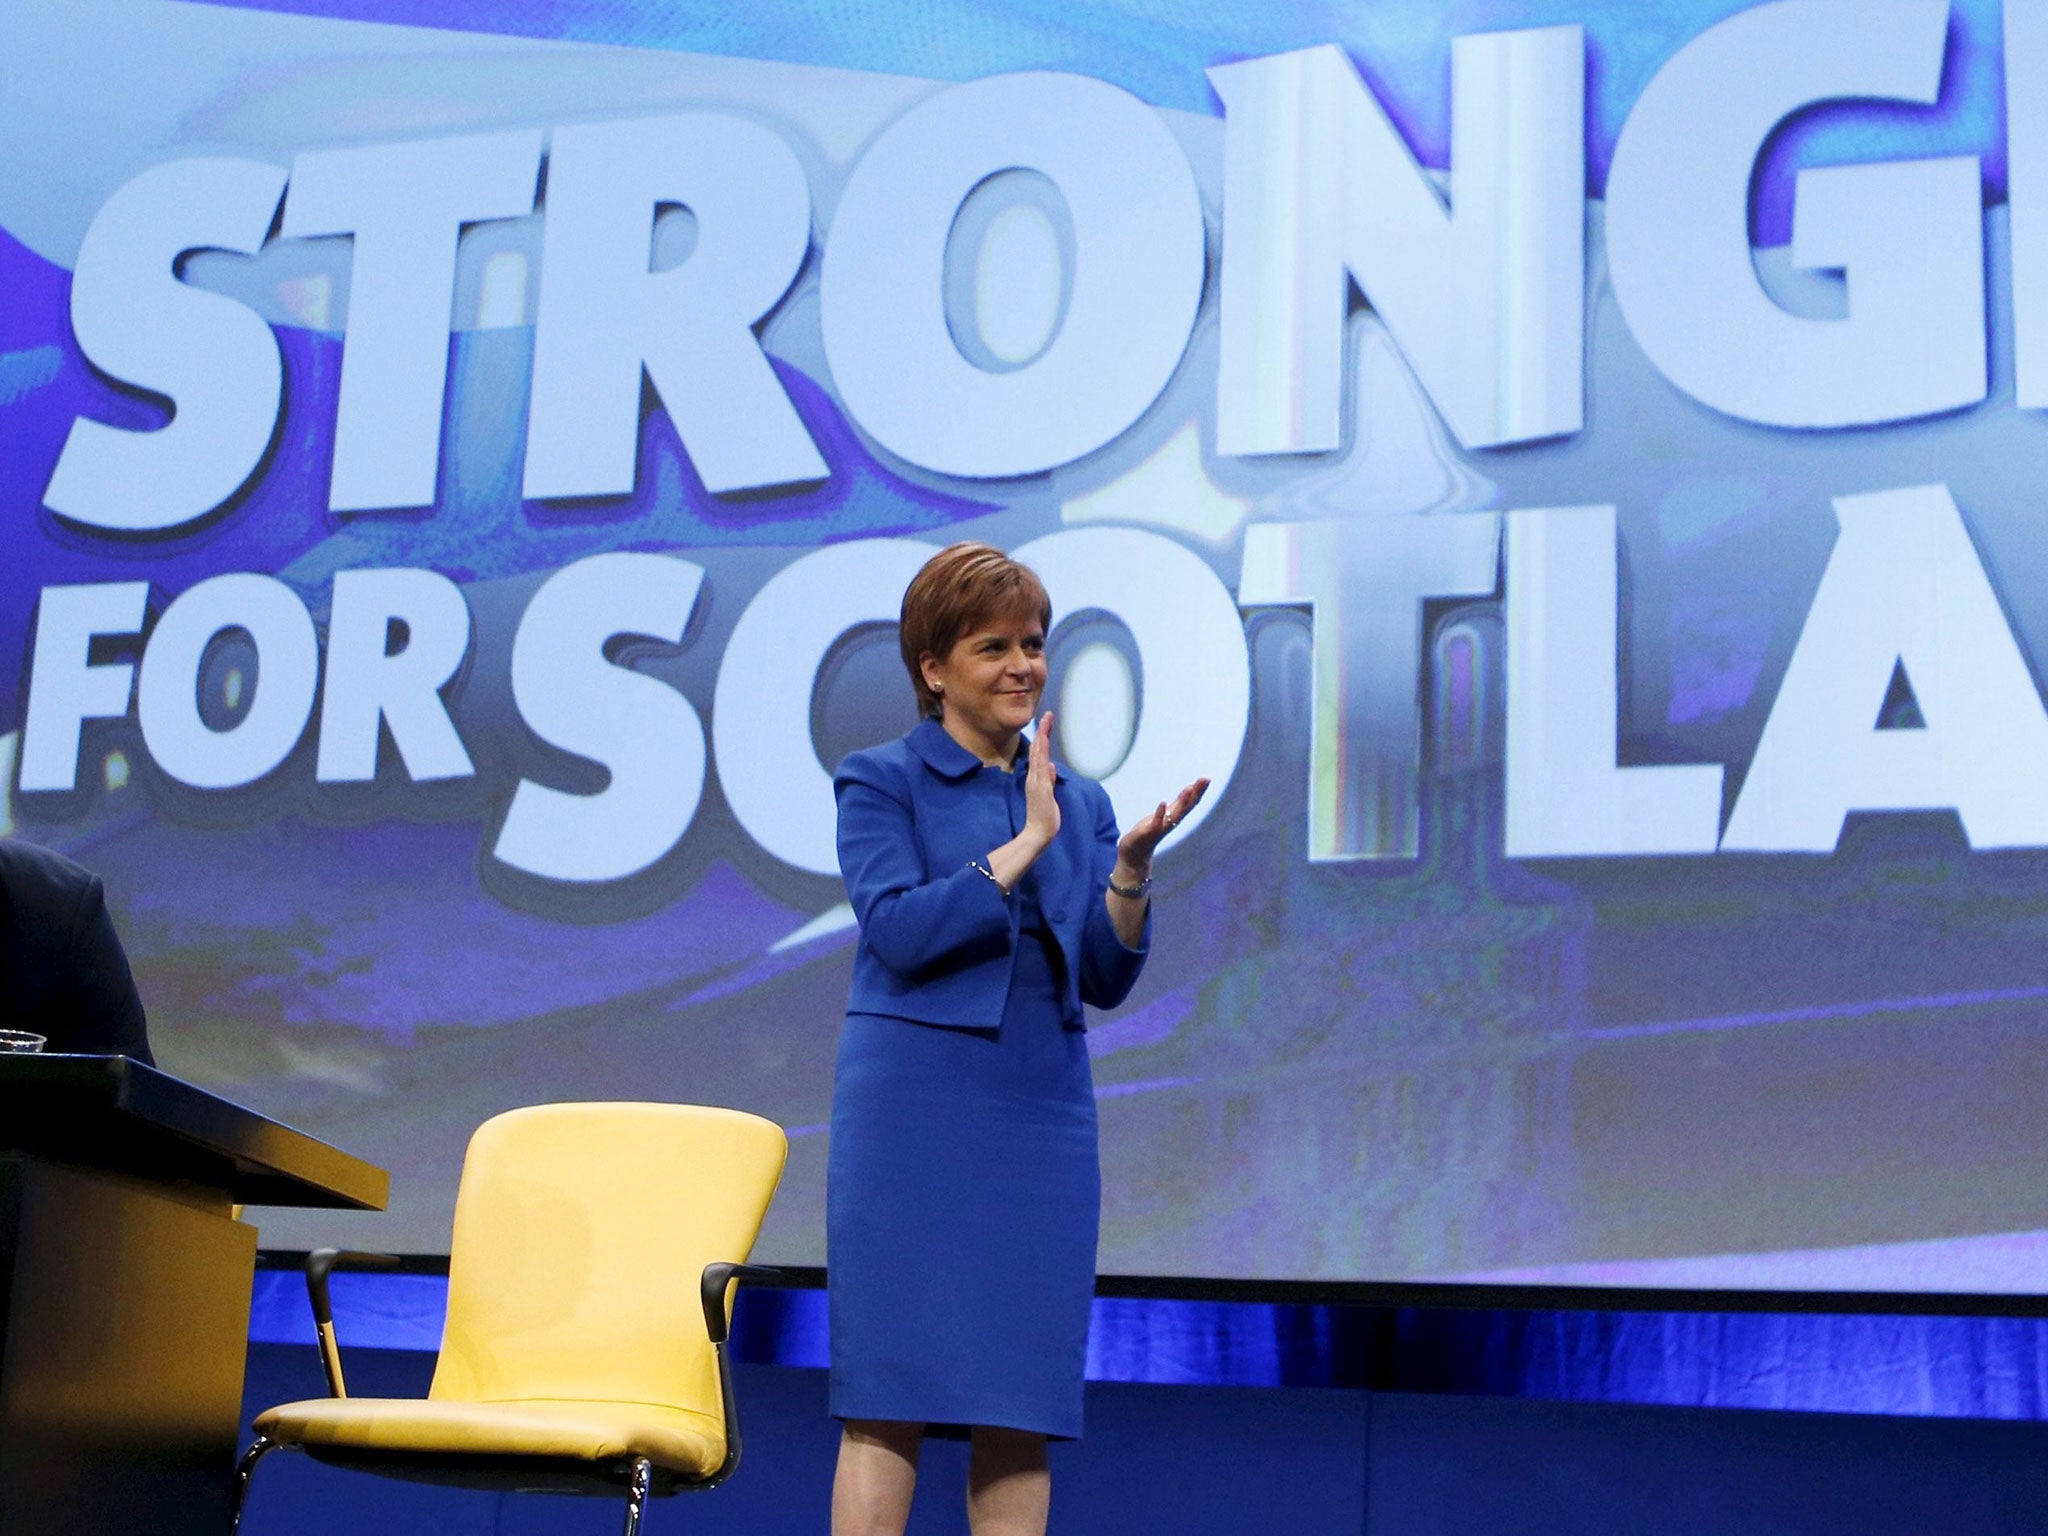 Scotland's First Minister and leader of the Scottish National Party (SNP) Nicola Sturgeon at the SNP's annual conference in Aberdeen, Scotland, October 17, 2015